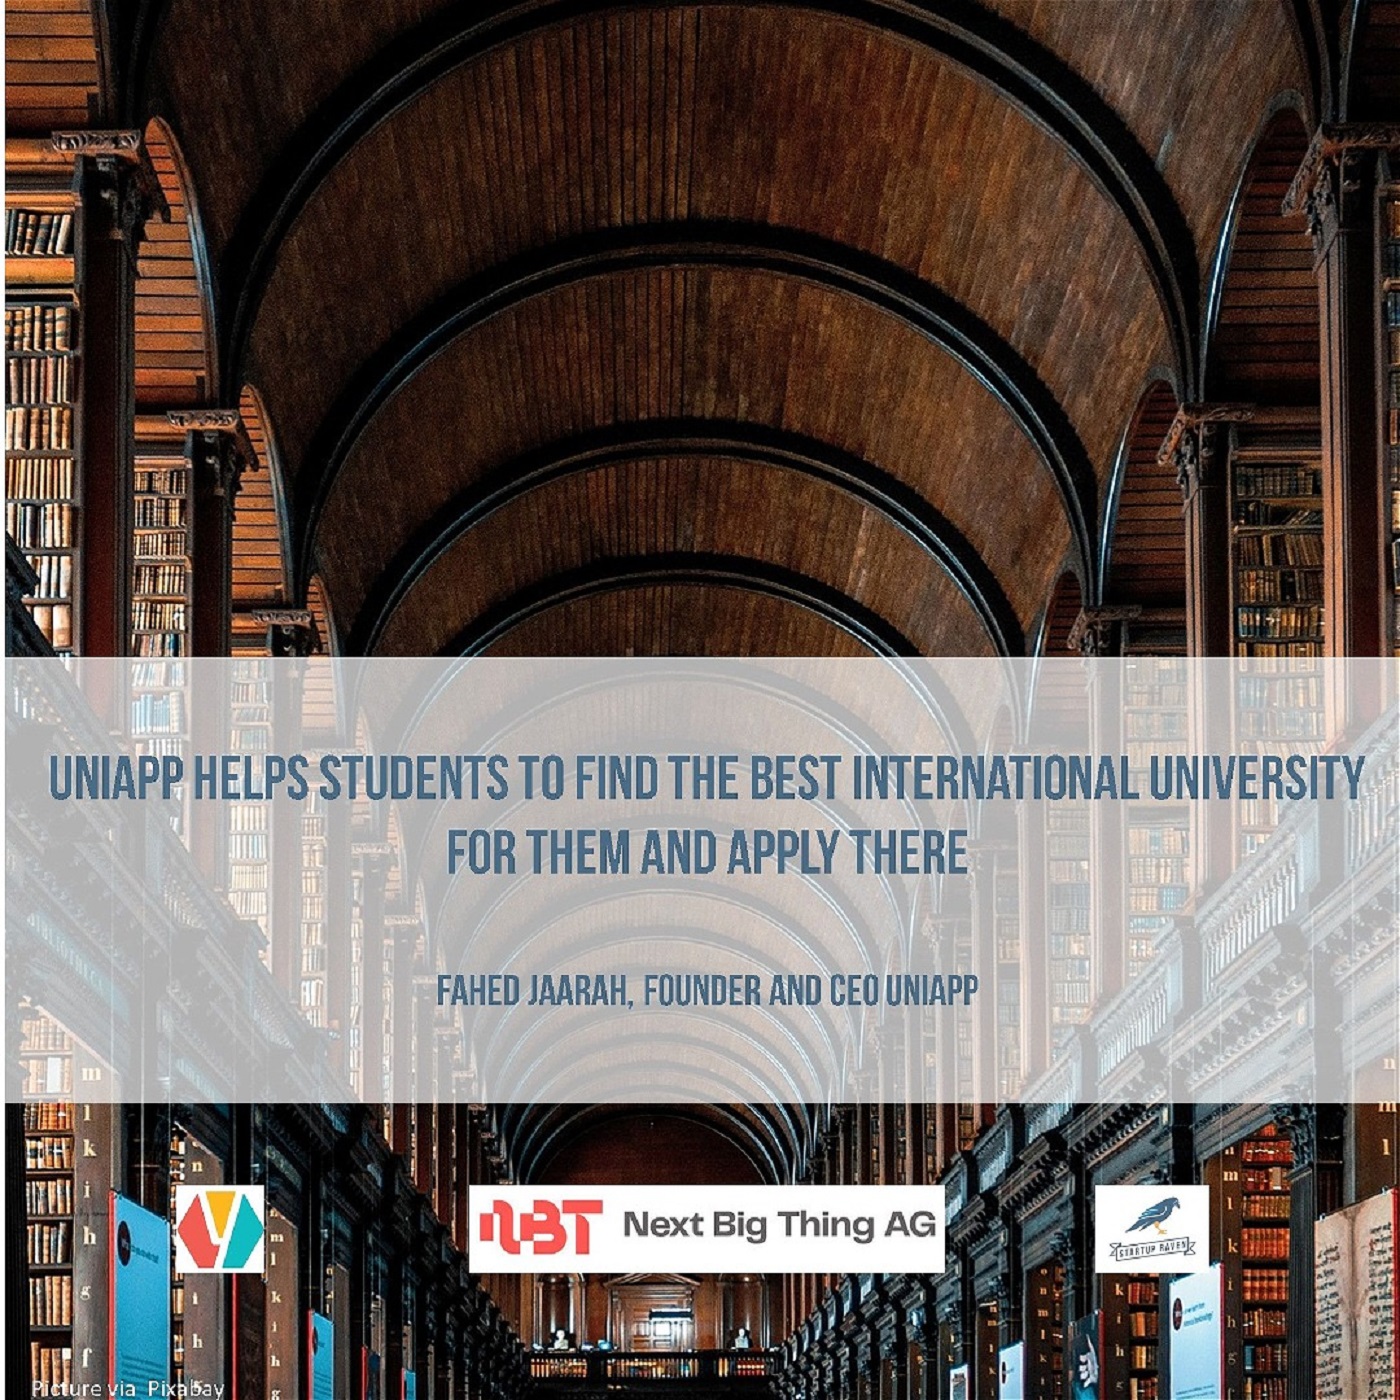 UNIAPP Helps Students to Find the Best International University for Them